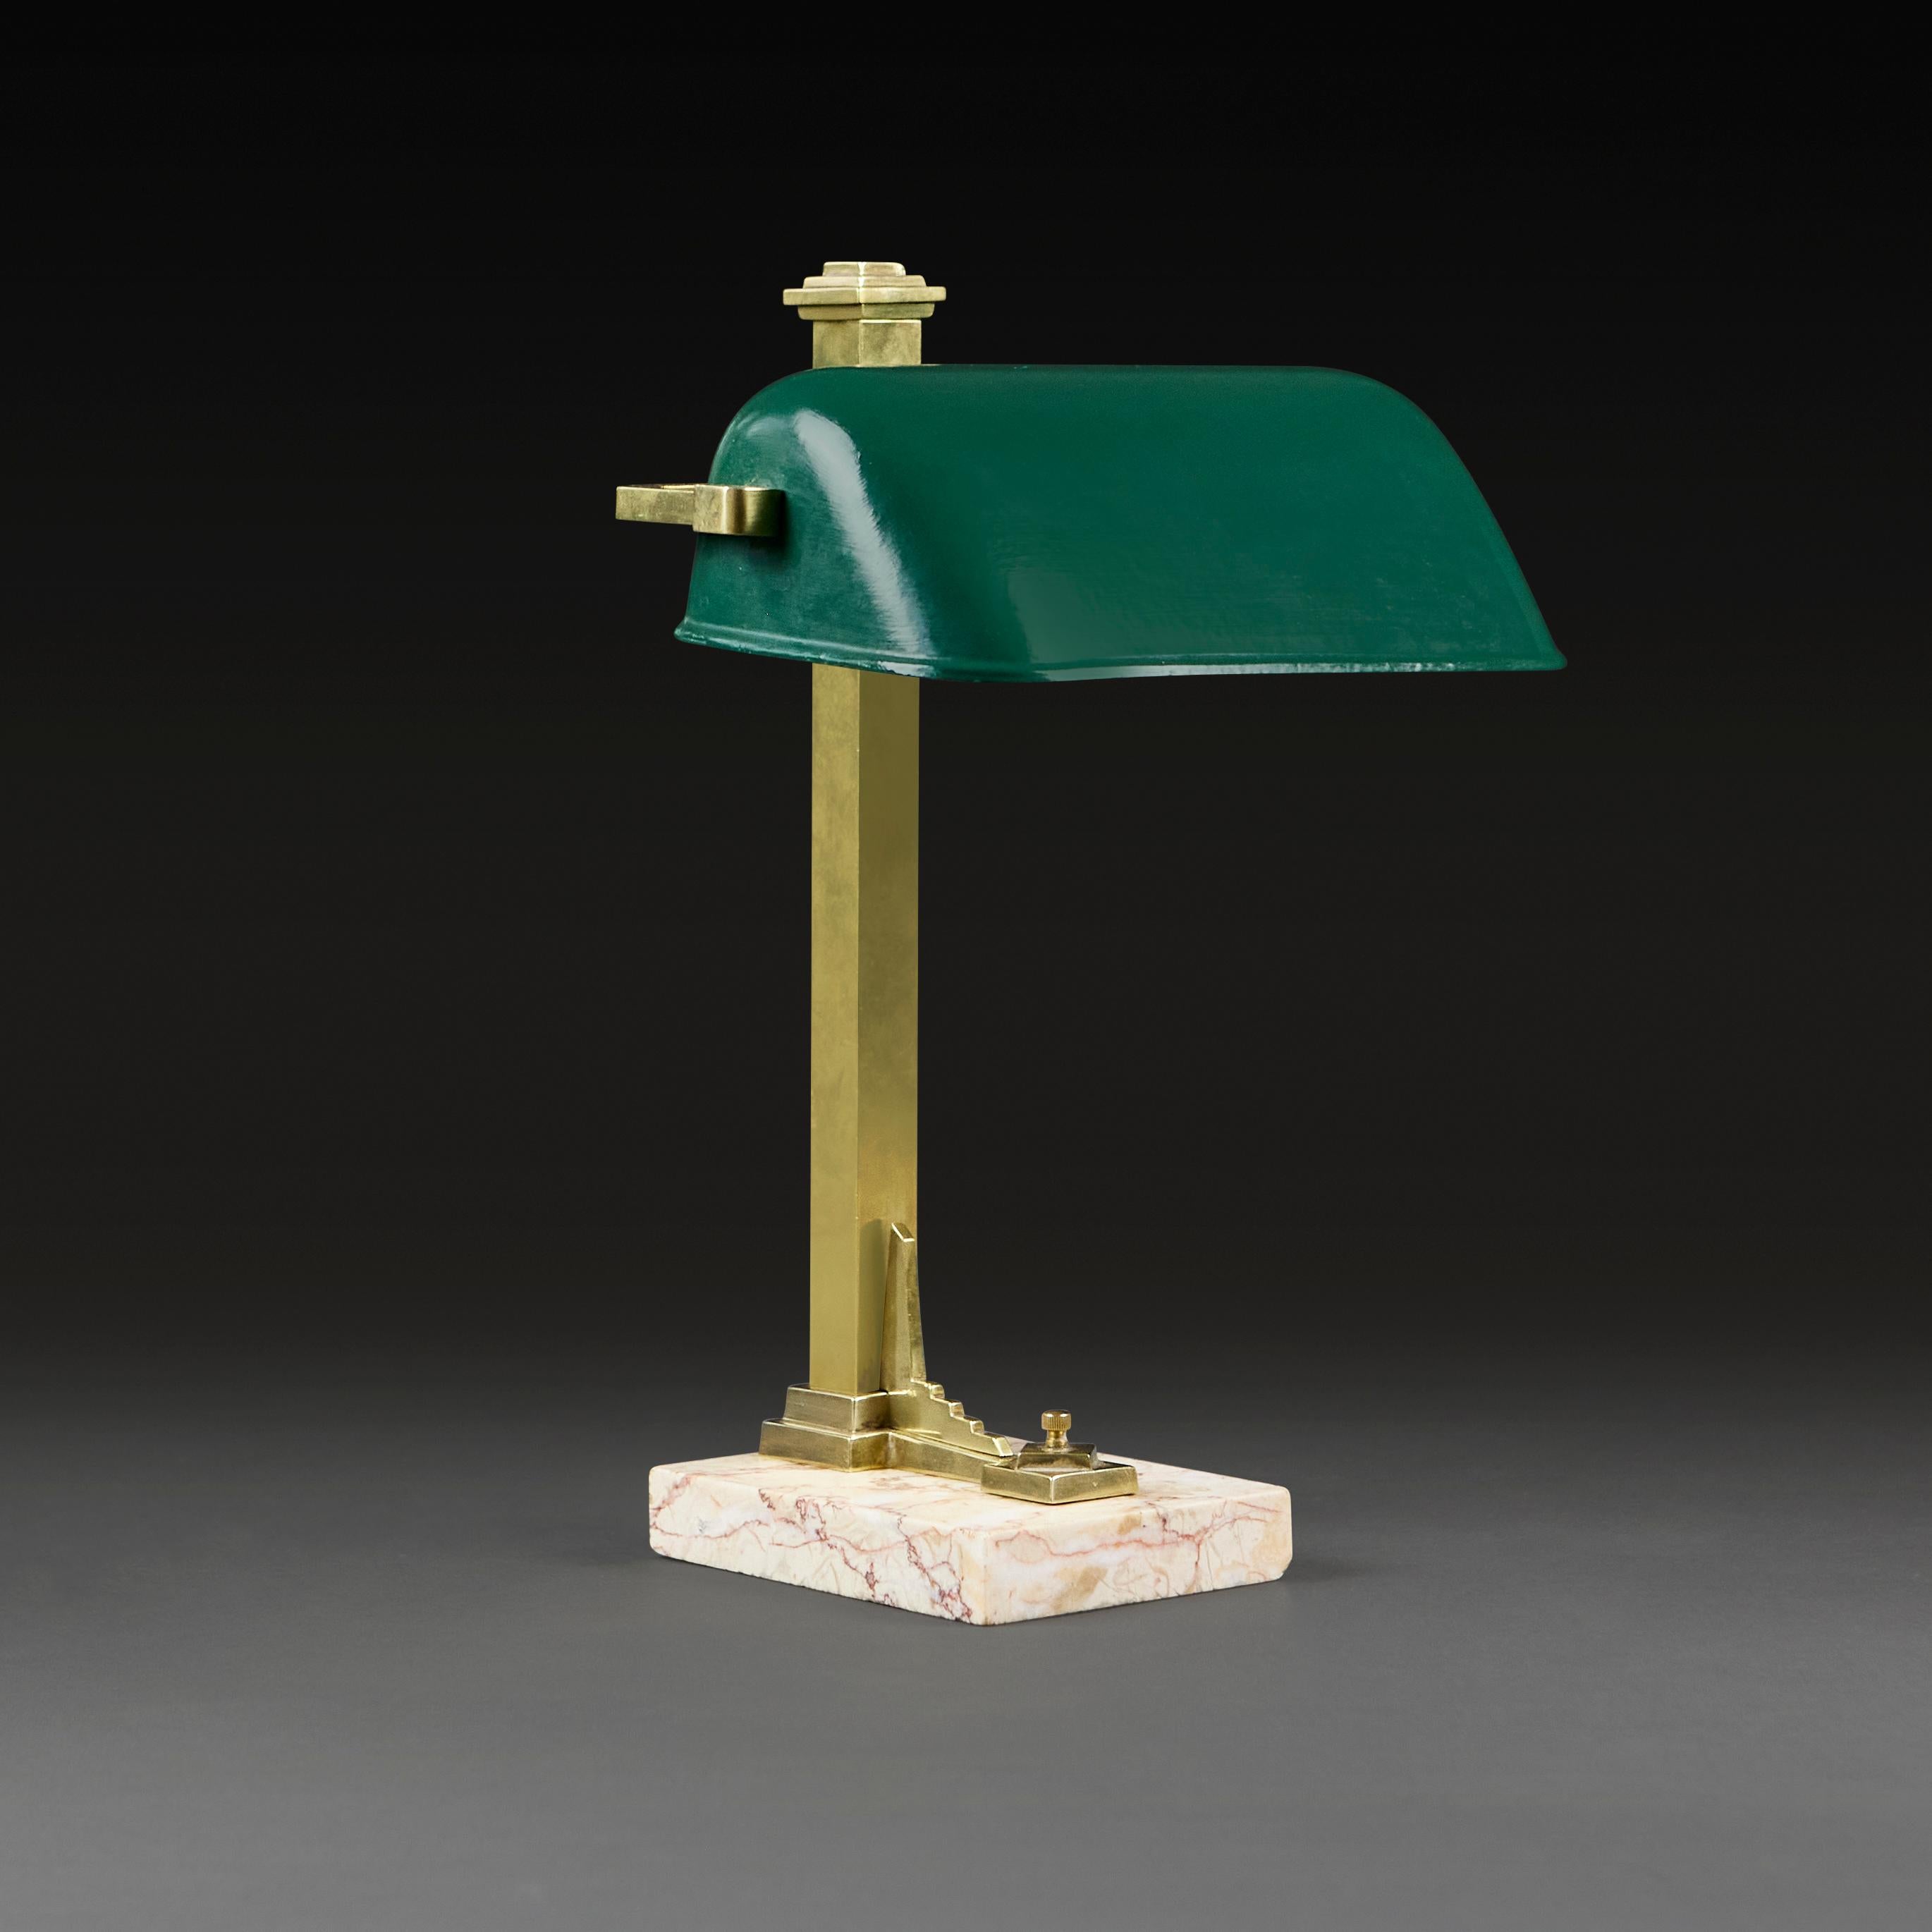 A 1930s French Art Deco Desk Lamp in Brass, Marble and Green Enamel In Good Condition For Sale In London, GB